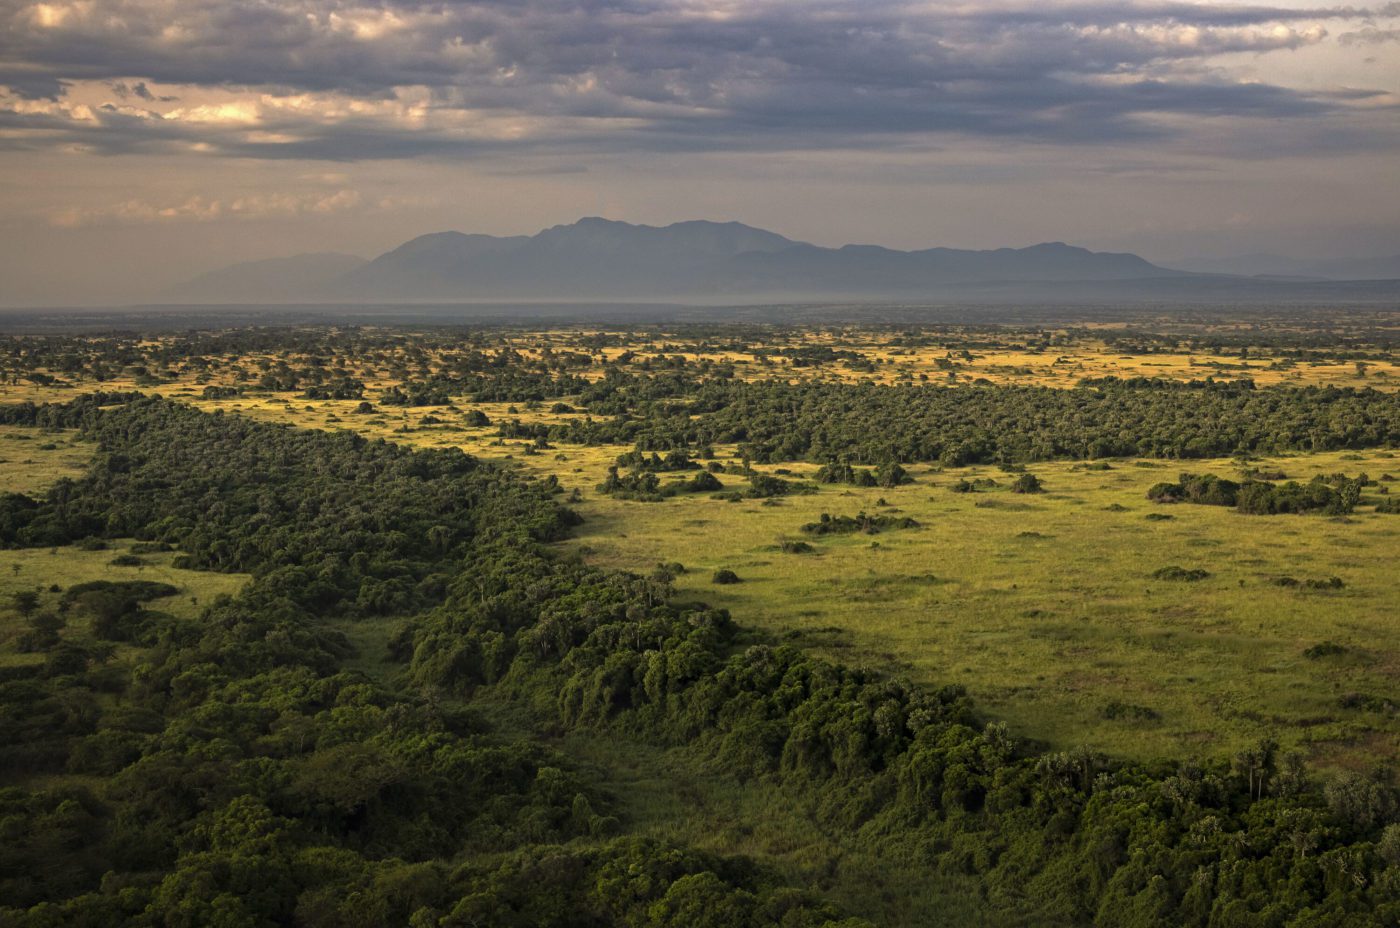 A scenic image of the Lulimbi plains